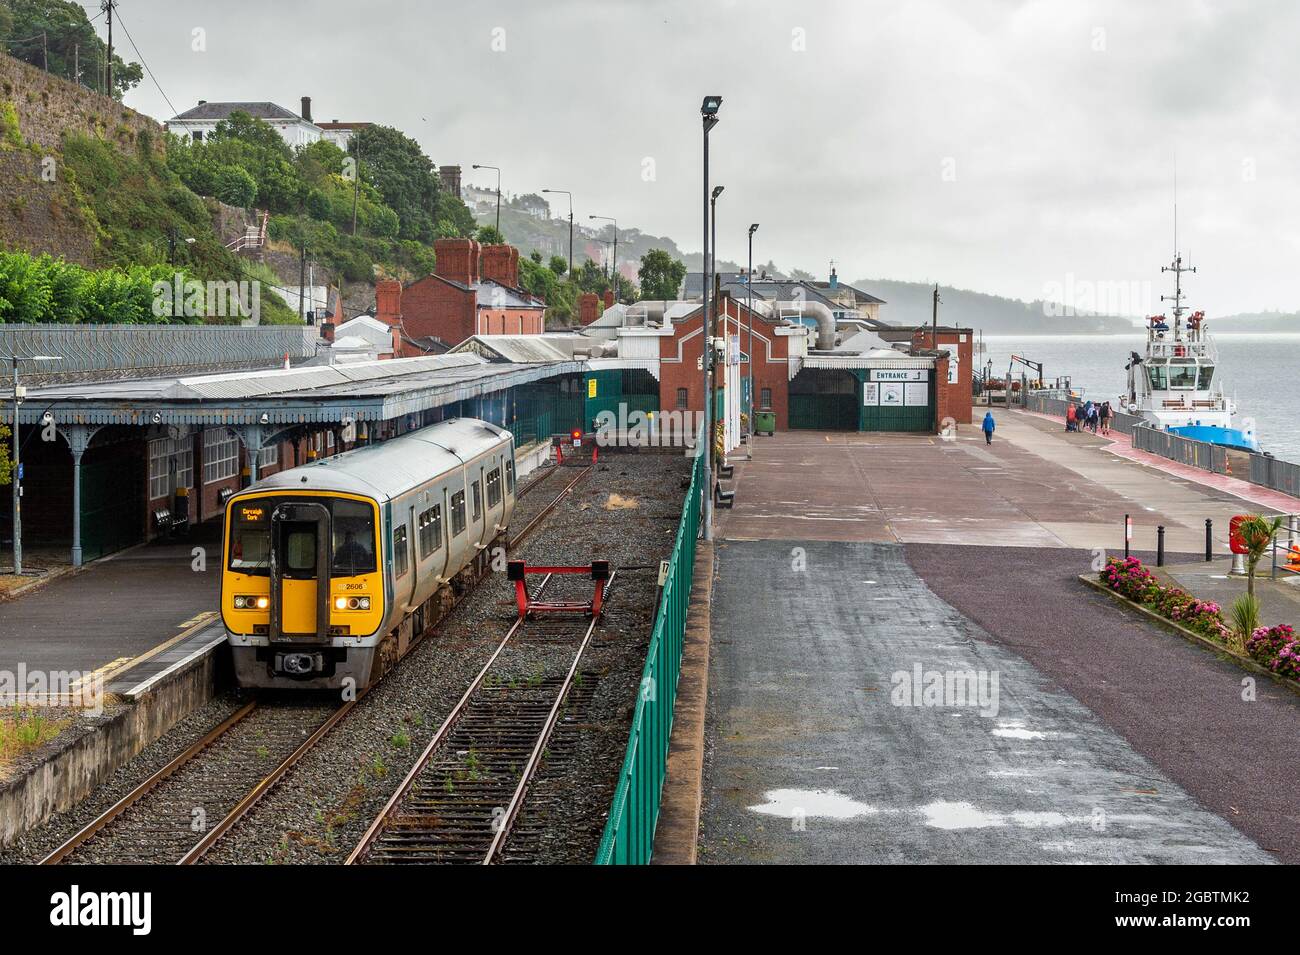 Cobh, County Cork, Ireland. 5th Aug, 2021. Met Éireann has issued a yellow weather warning for heavy rain and thunderstorms which will lead to localised flooding and hazardous driving conditions. The warning is in place until 22.00 tonight. Cobh was pictured under a drab grey sky today, with frequent heavy showers. Credit: AG News/Alamy Live News Stock Photo